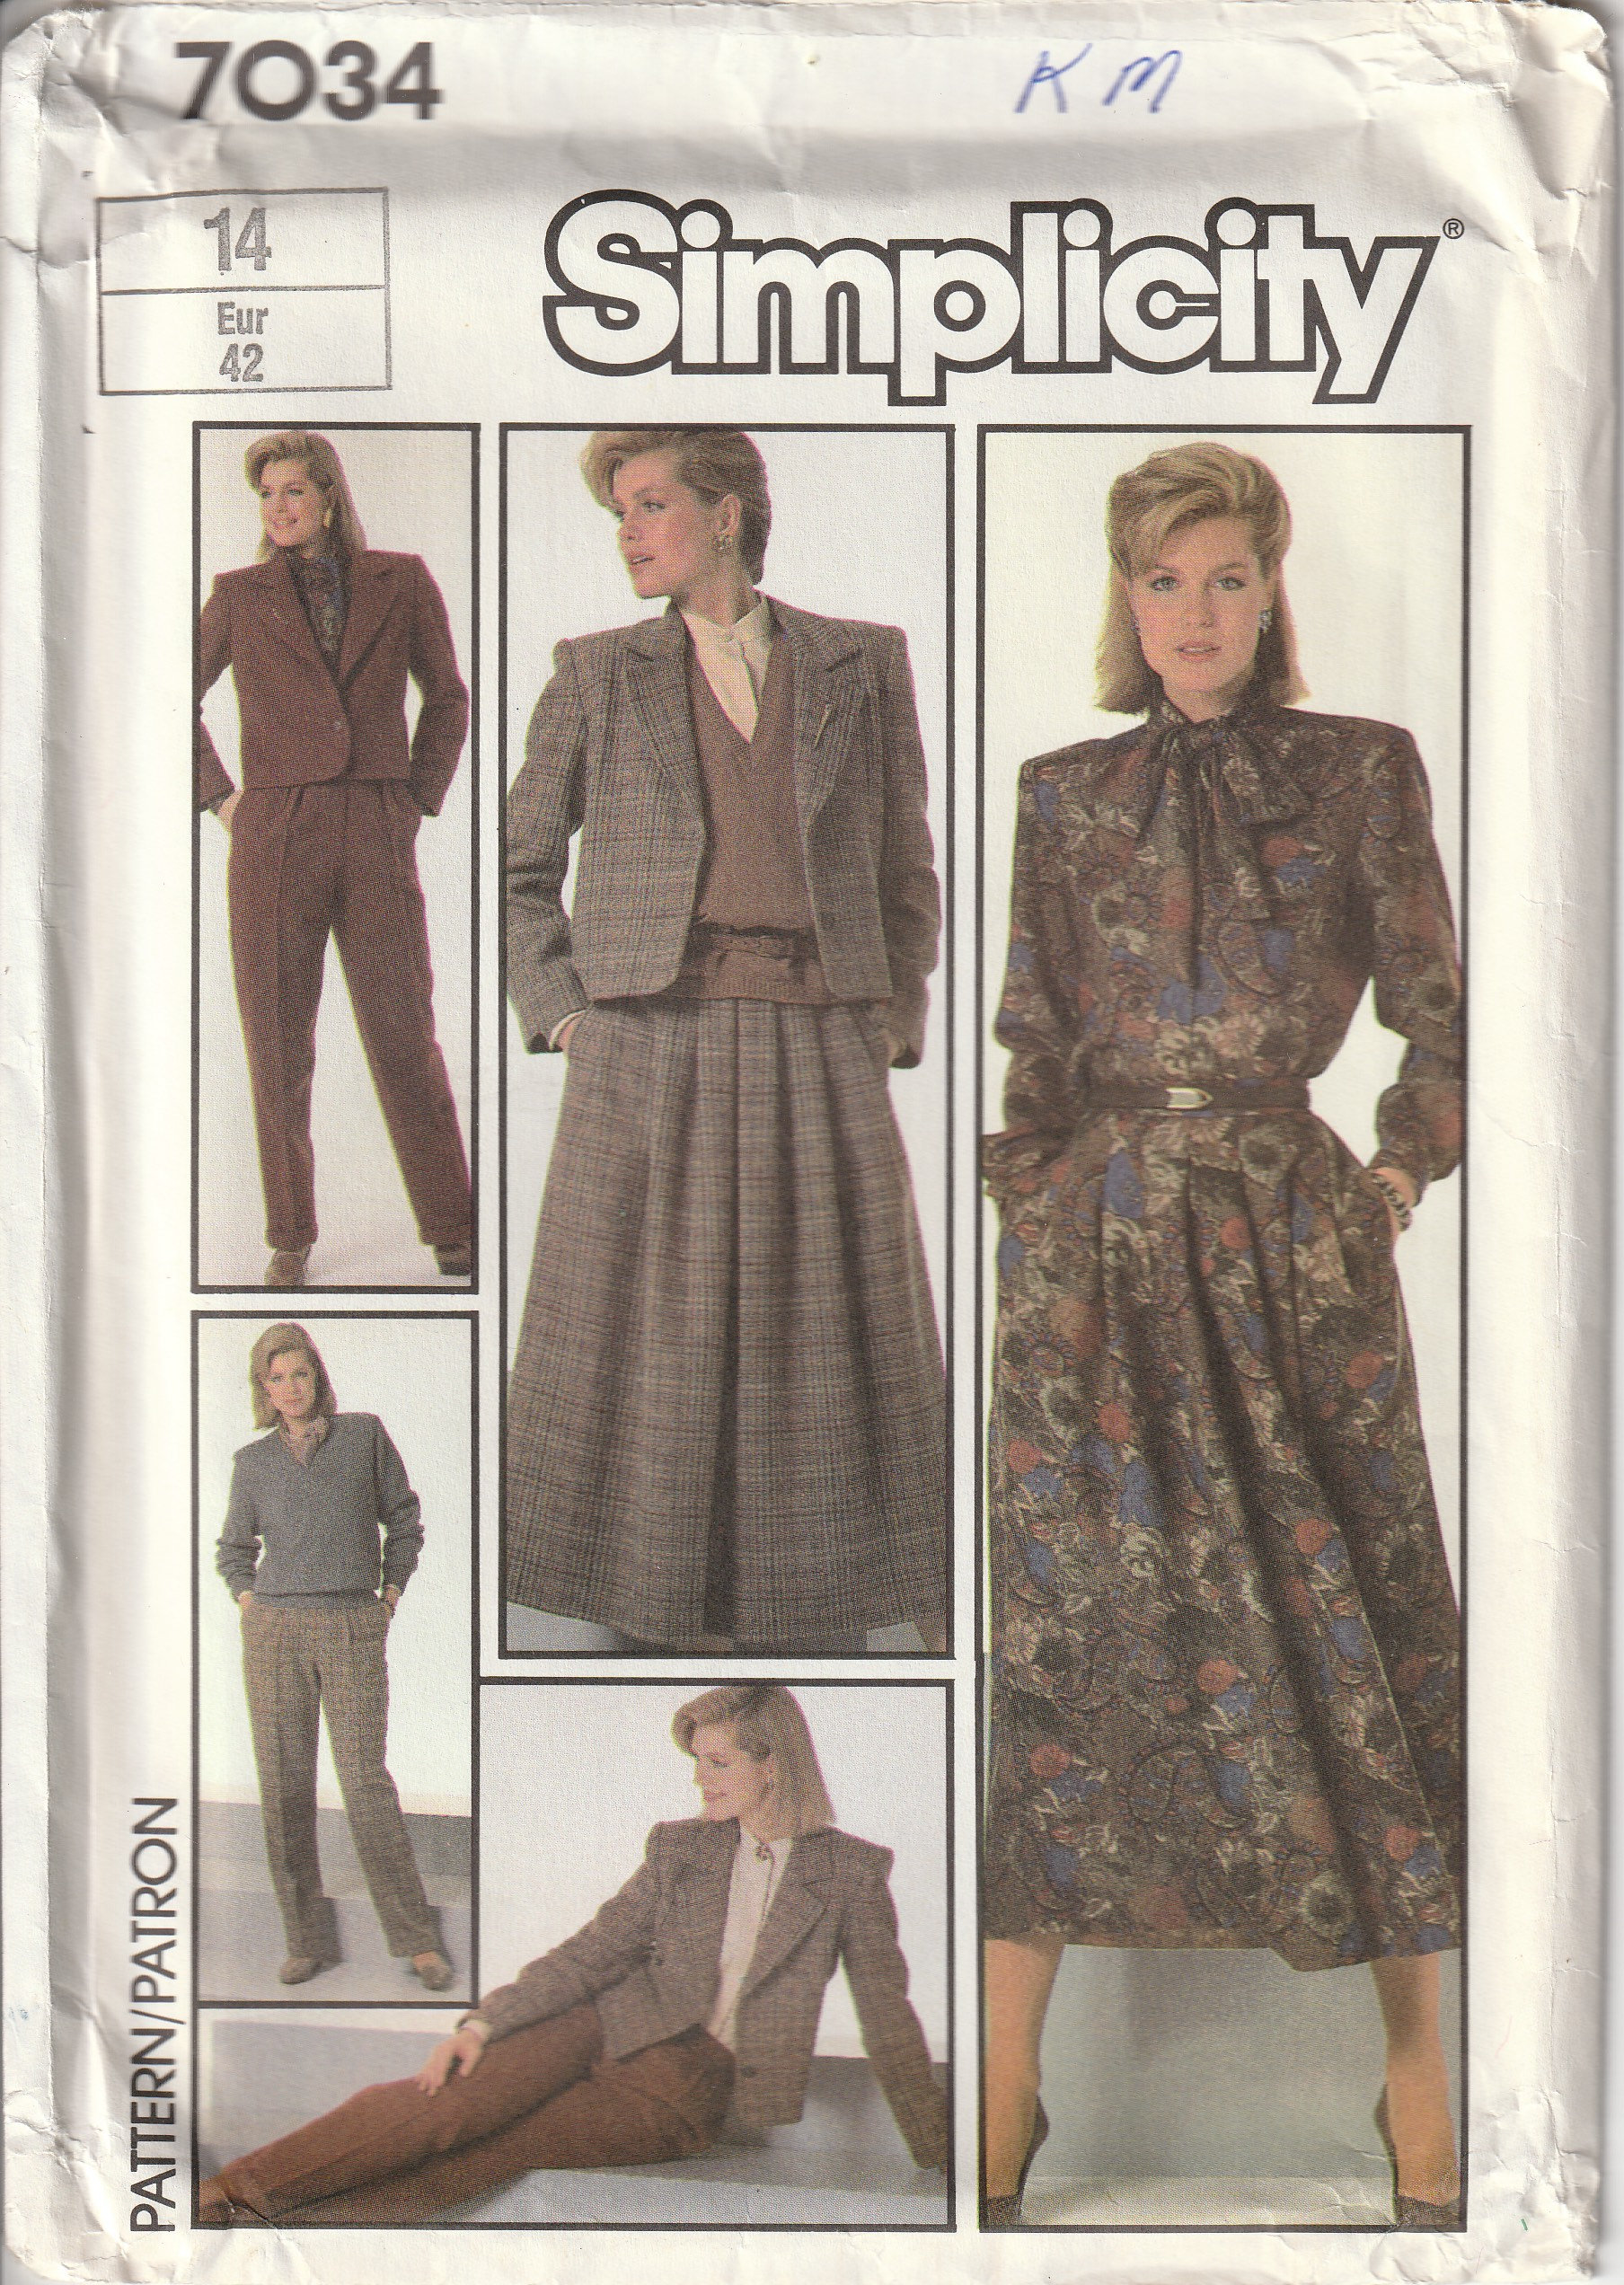 and Lined Jacket Sewing Pattern Ladies Size 14 80s Wardrobe Sewing Pattern Simplicity 6265 Vintage 1980s Misses Slim Skirt Blouse